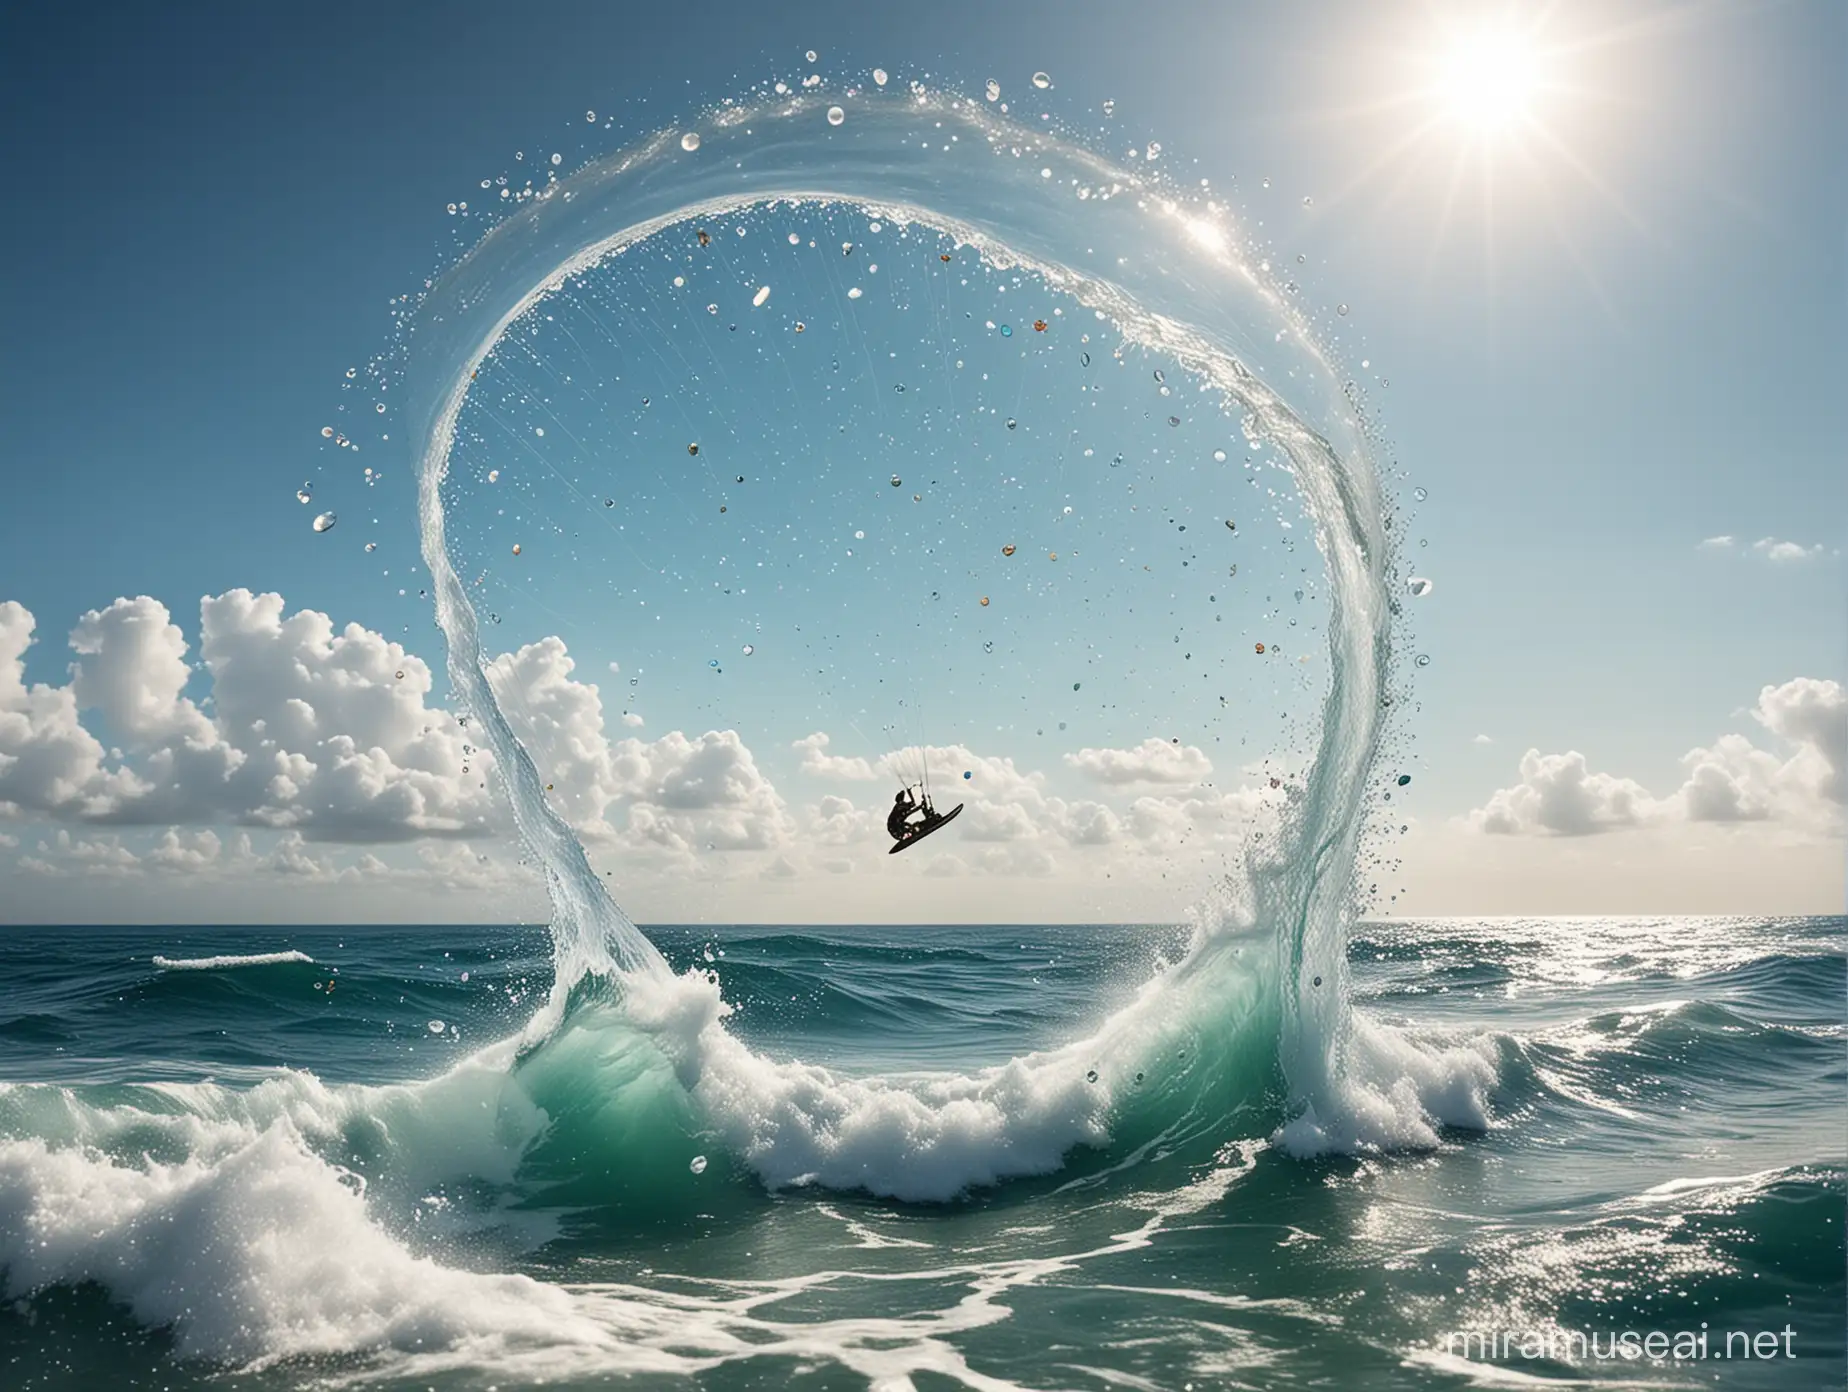 Ocean Adventure Surfers Paragliders and Sea Creatures in Glass Can Splash